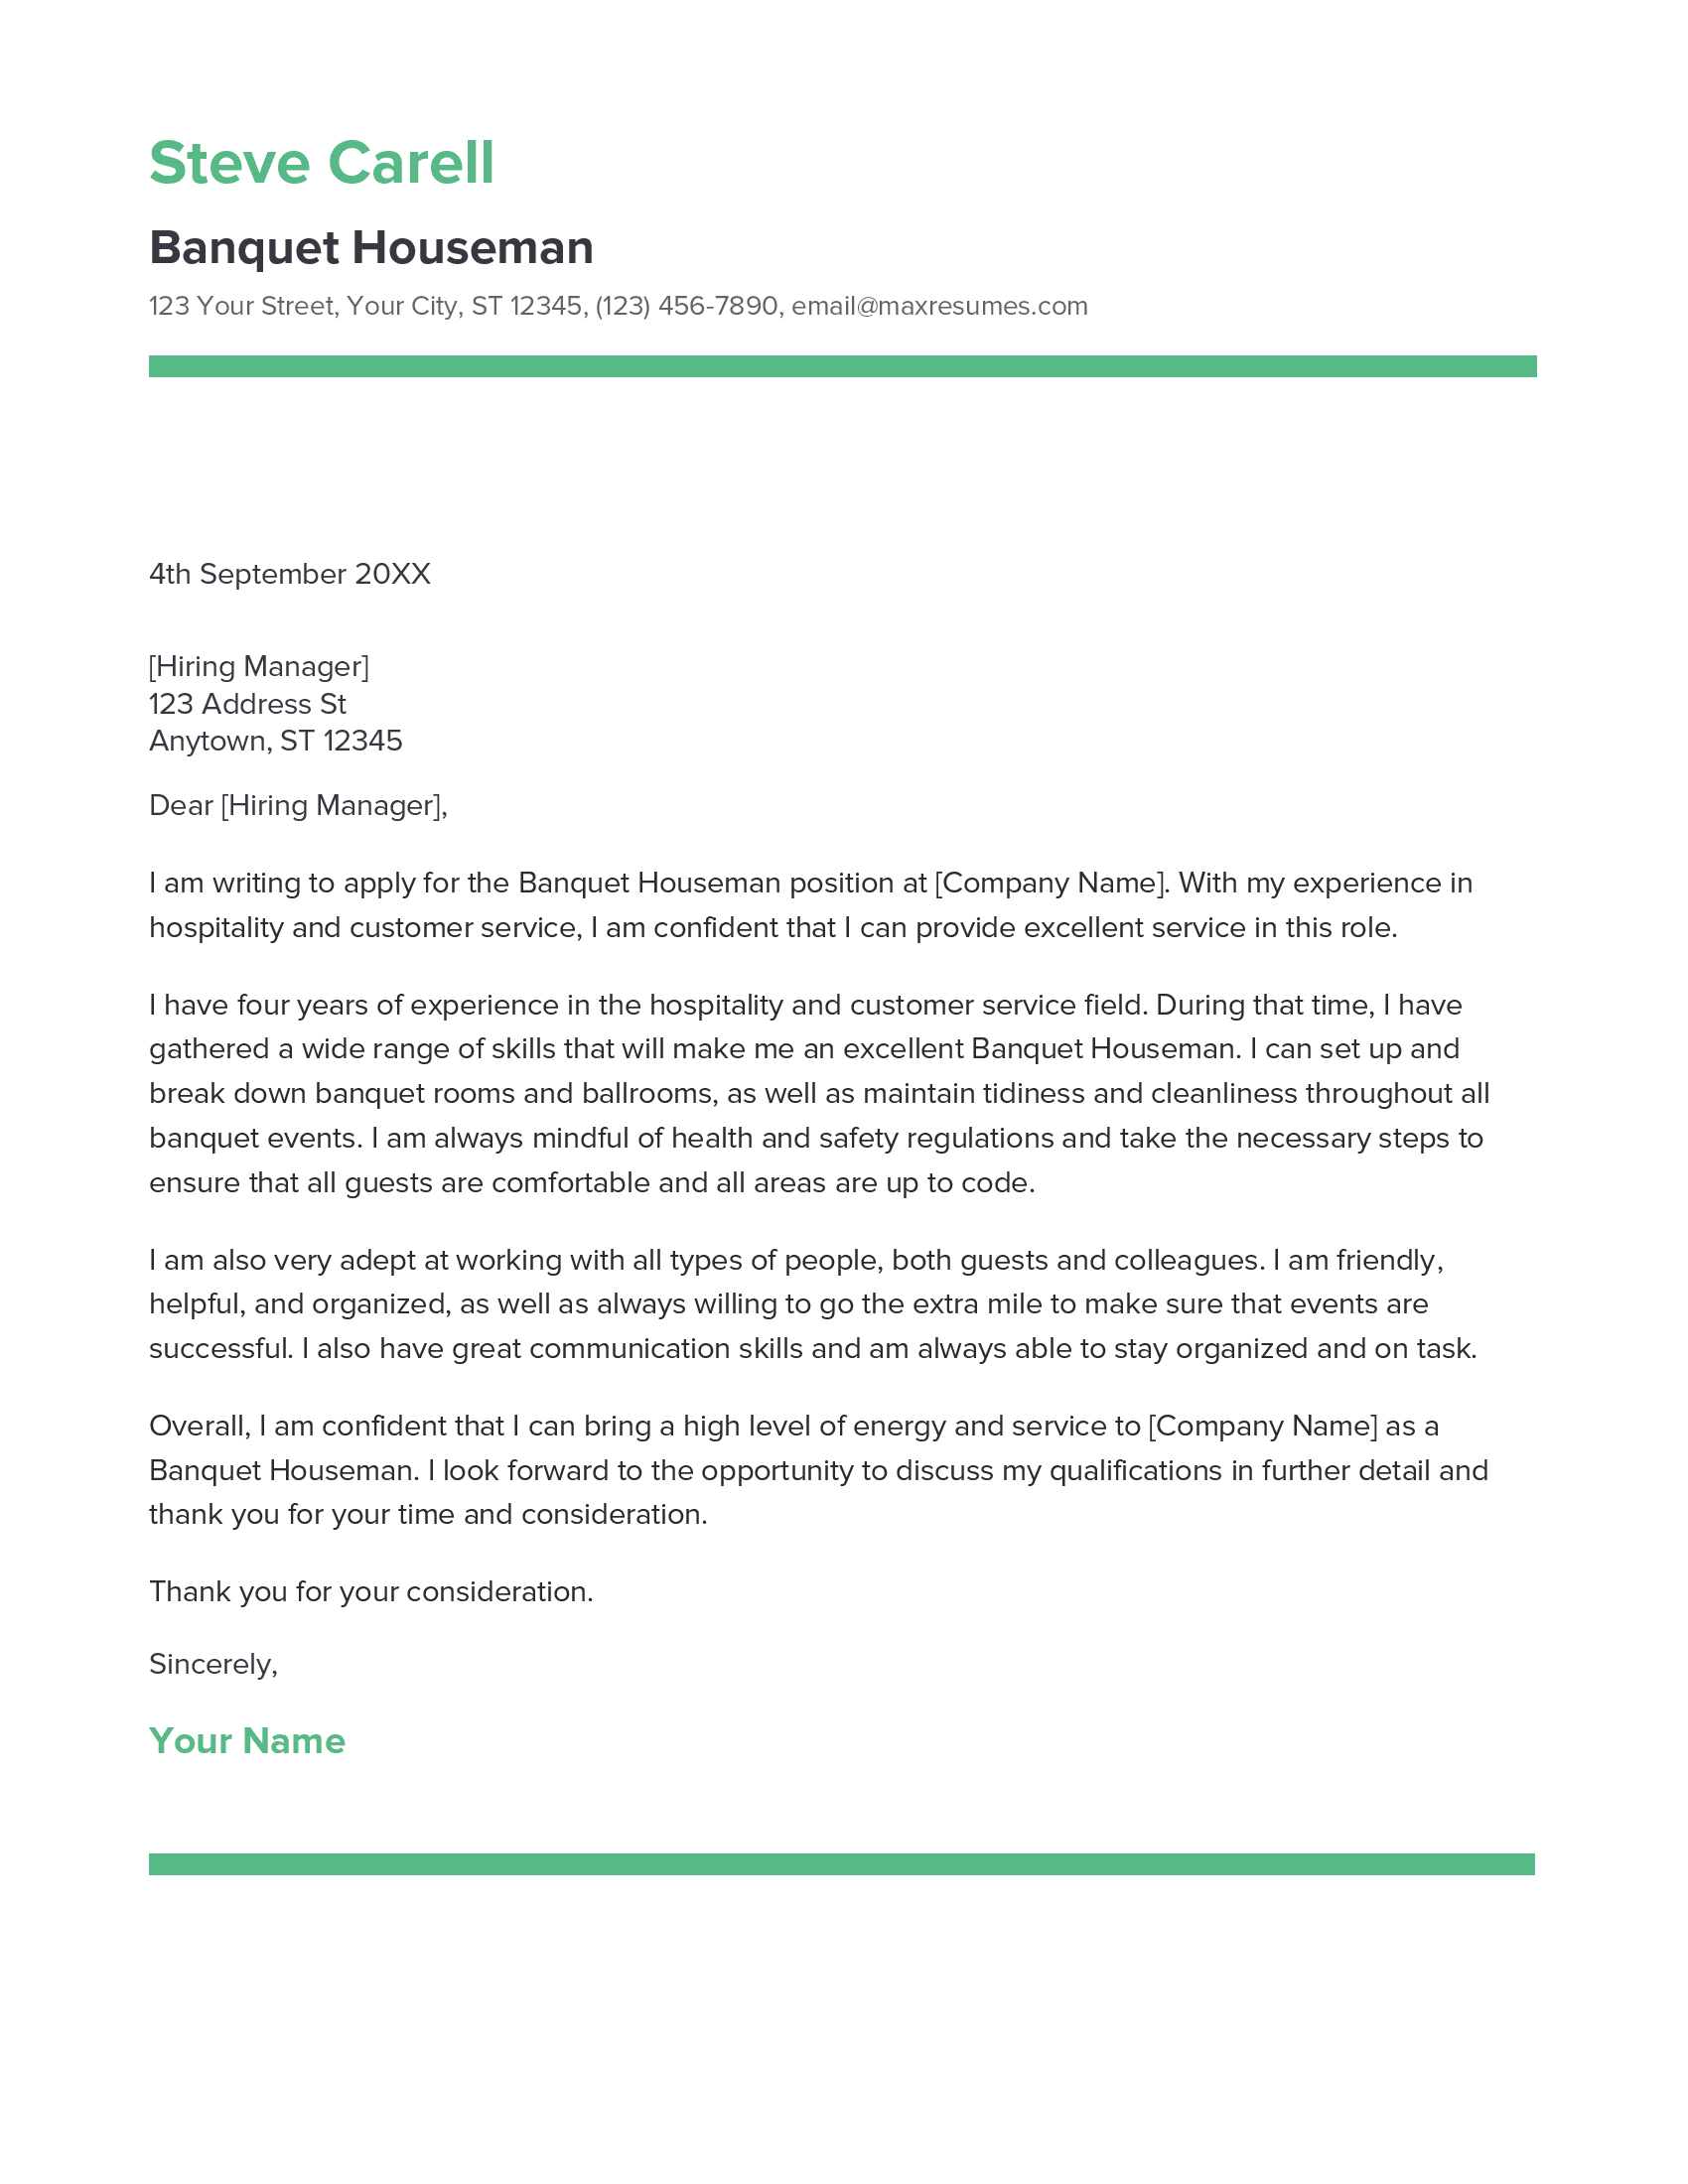 Banquet Houseman Cover Letter Example